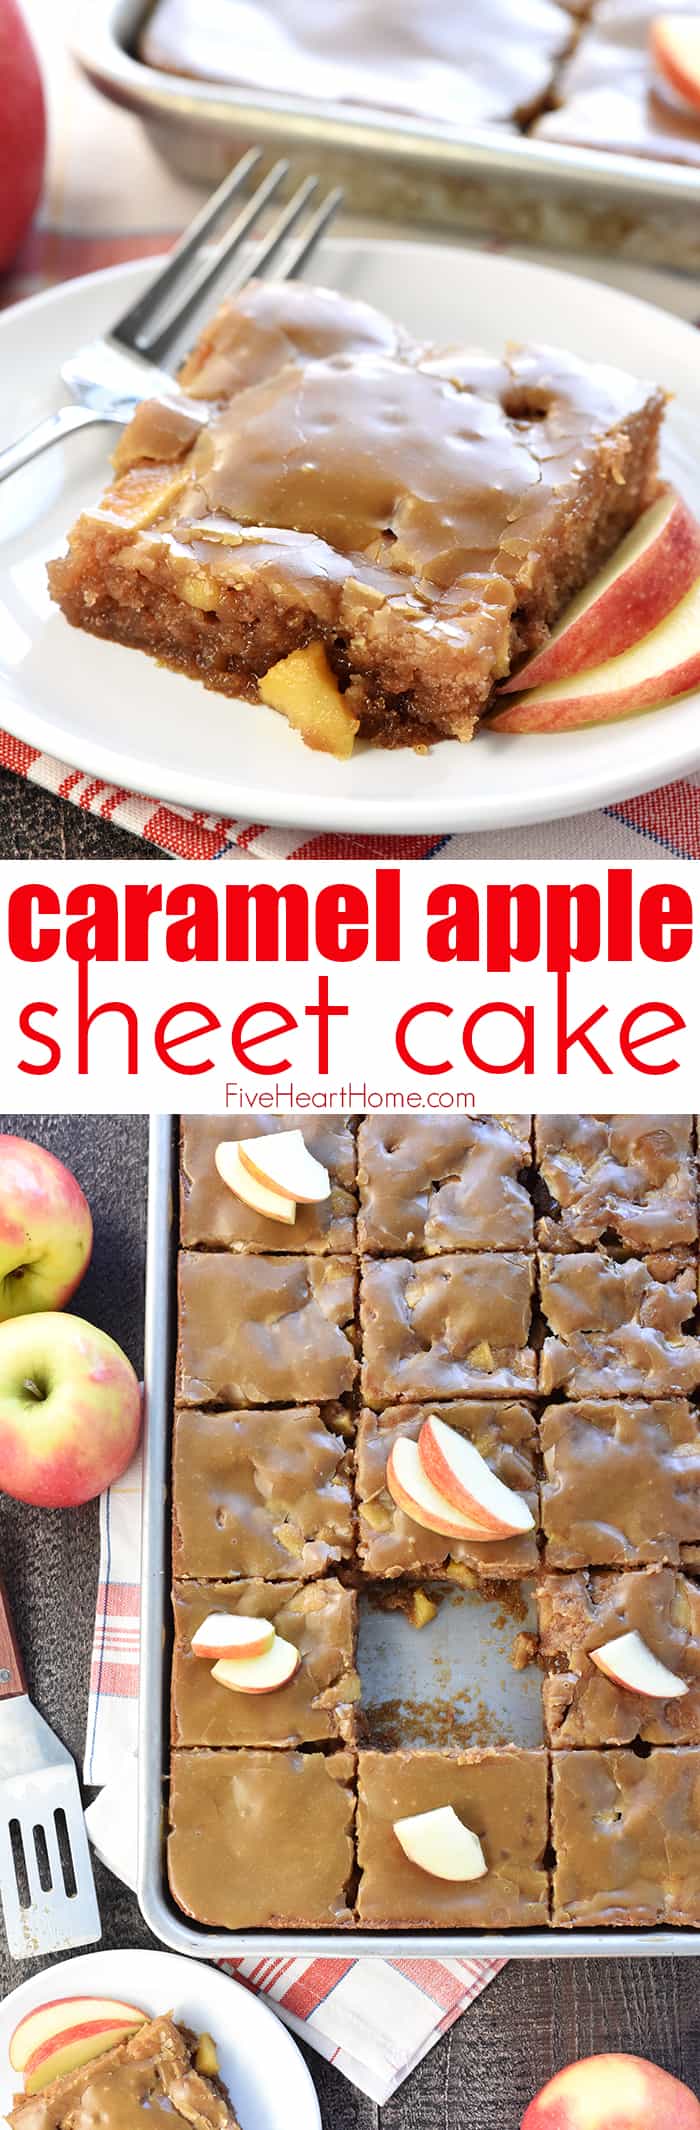 Caramel Apple Cake is a sweet, moist, fall sheet cake loaded with tender apples and topped with a gooey caramel glaze…perfect for feeding a crowd! | FiveHeartHome.com via @fivehearthome